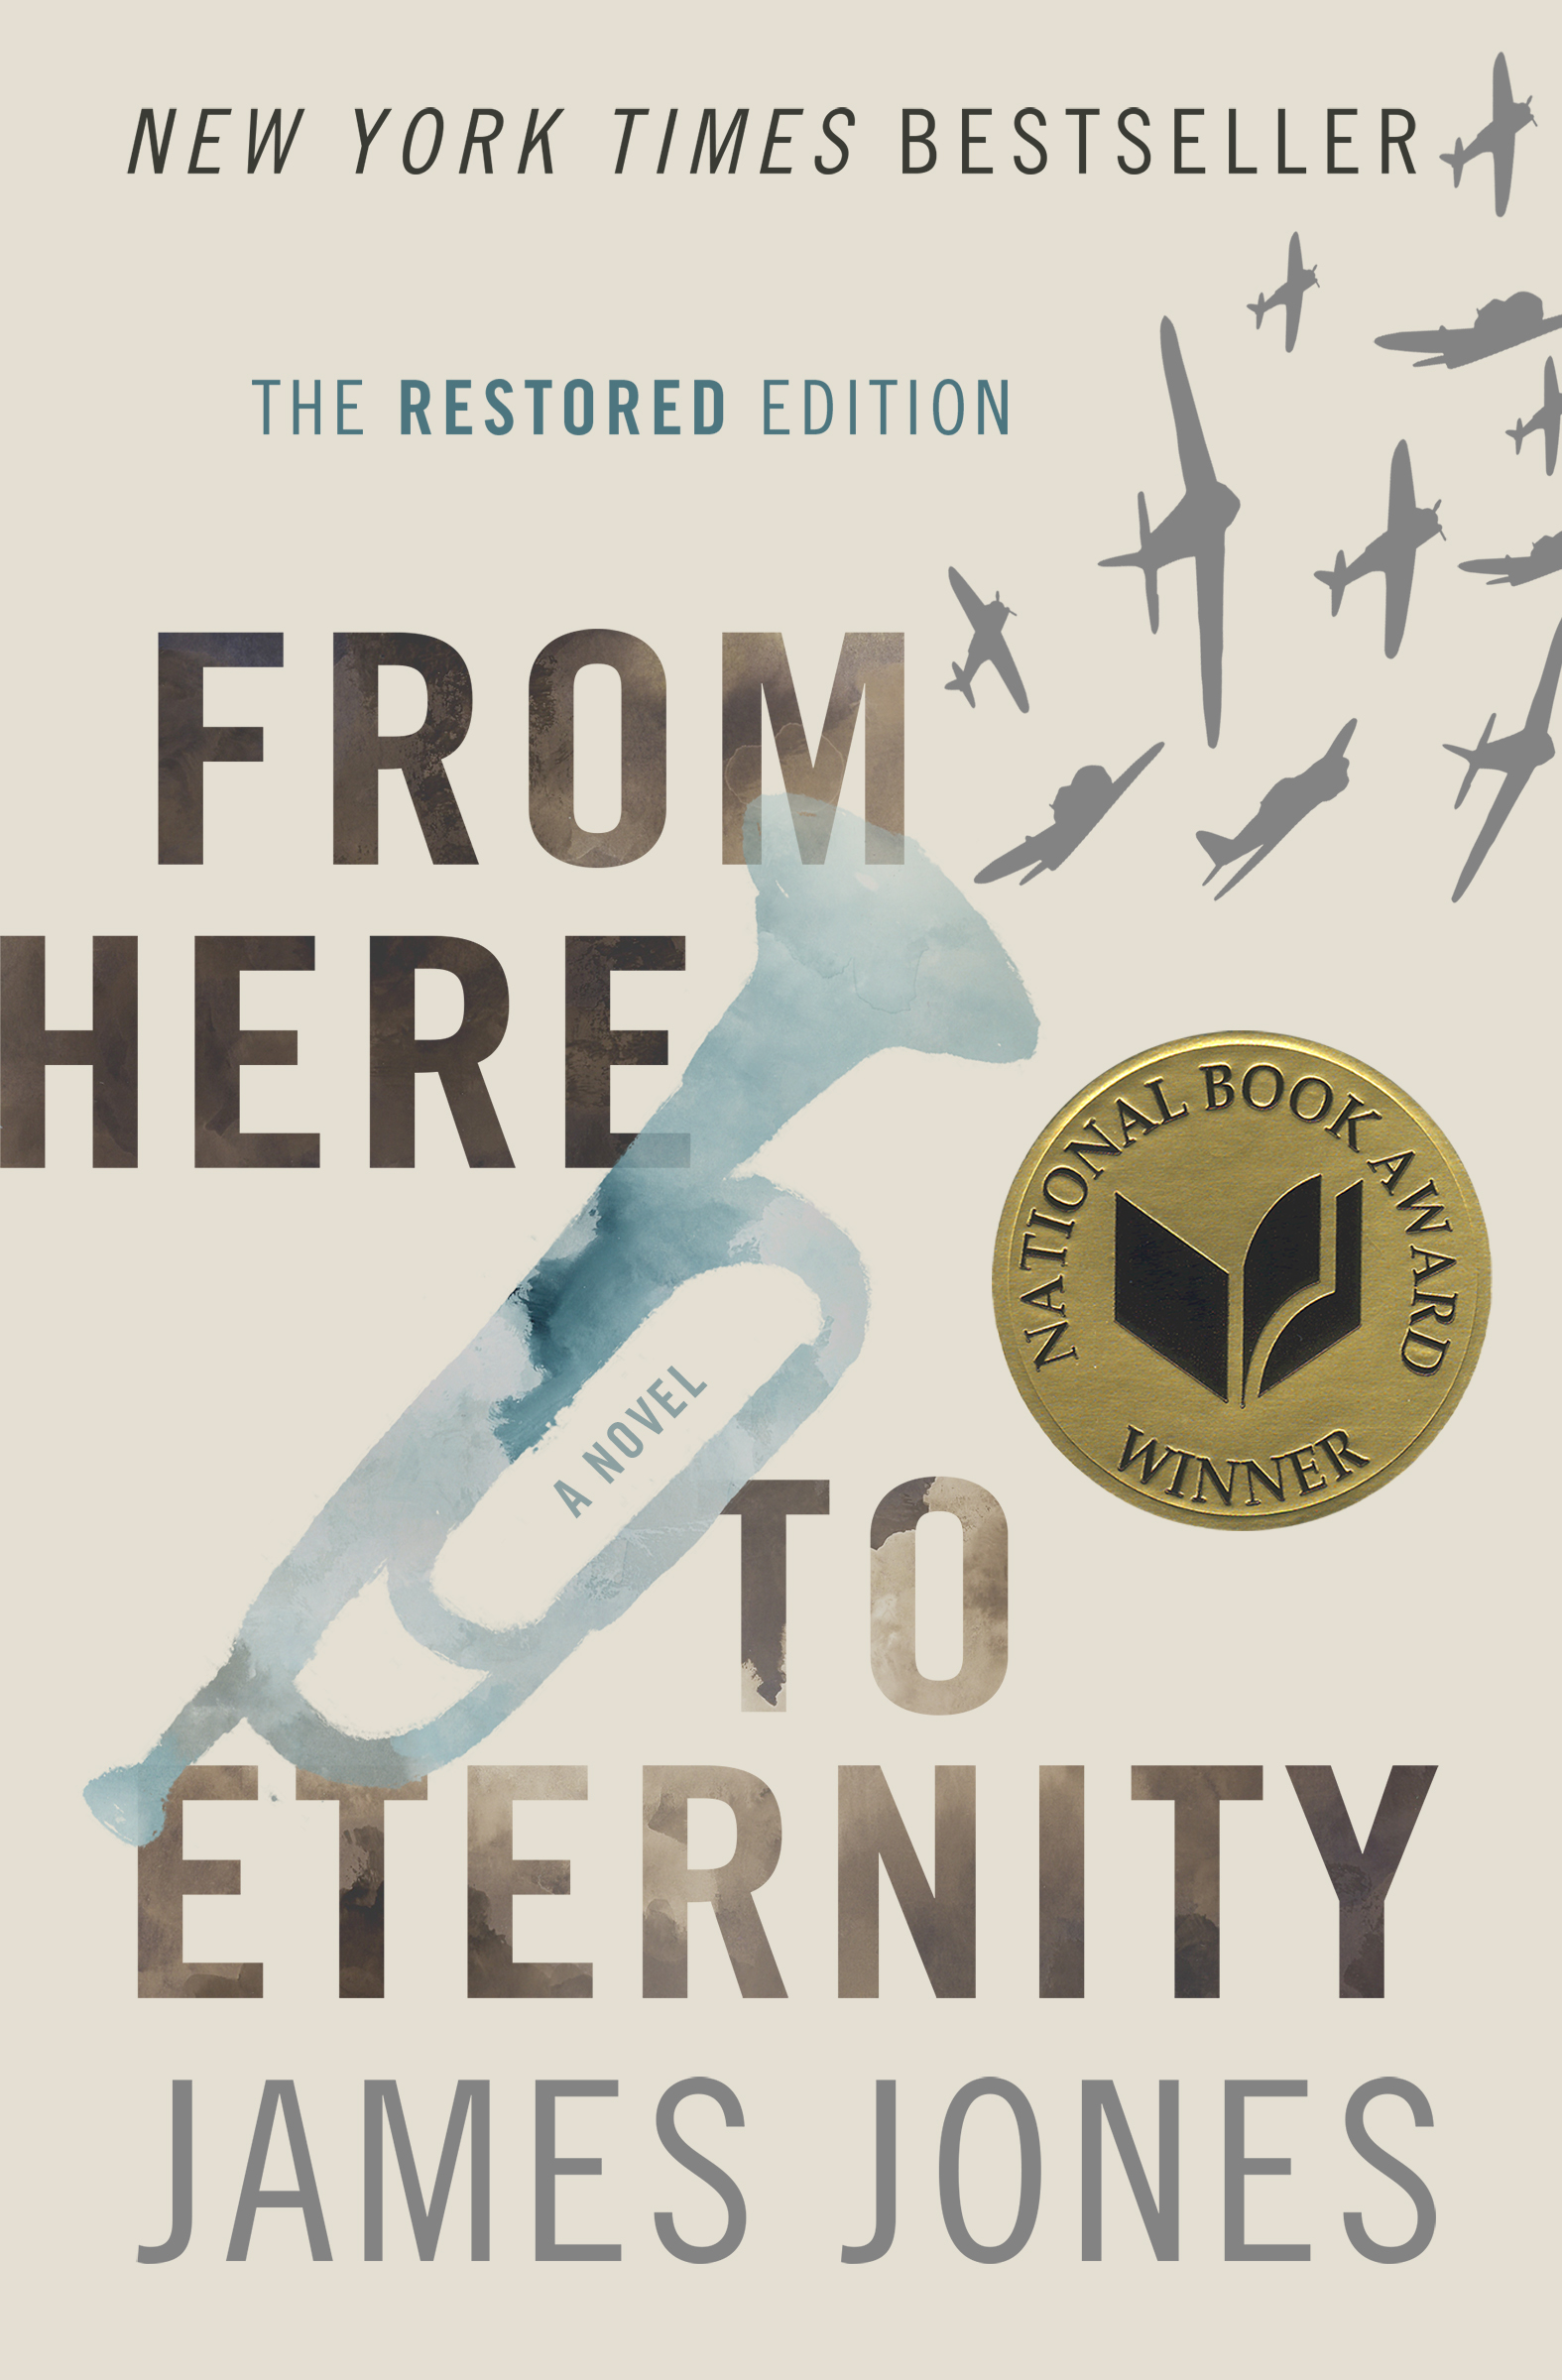 From here to eternity cover image